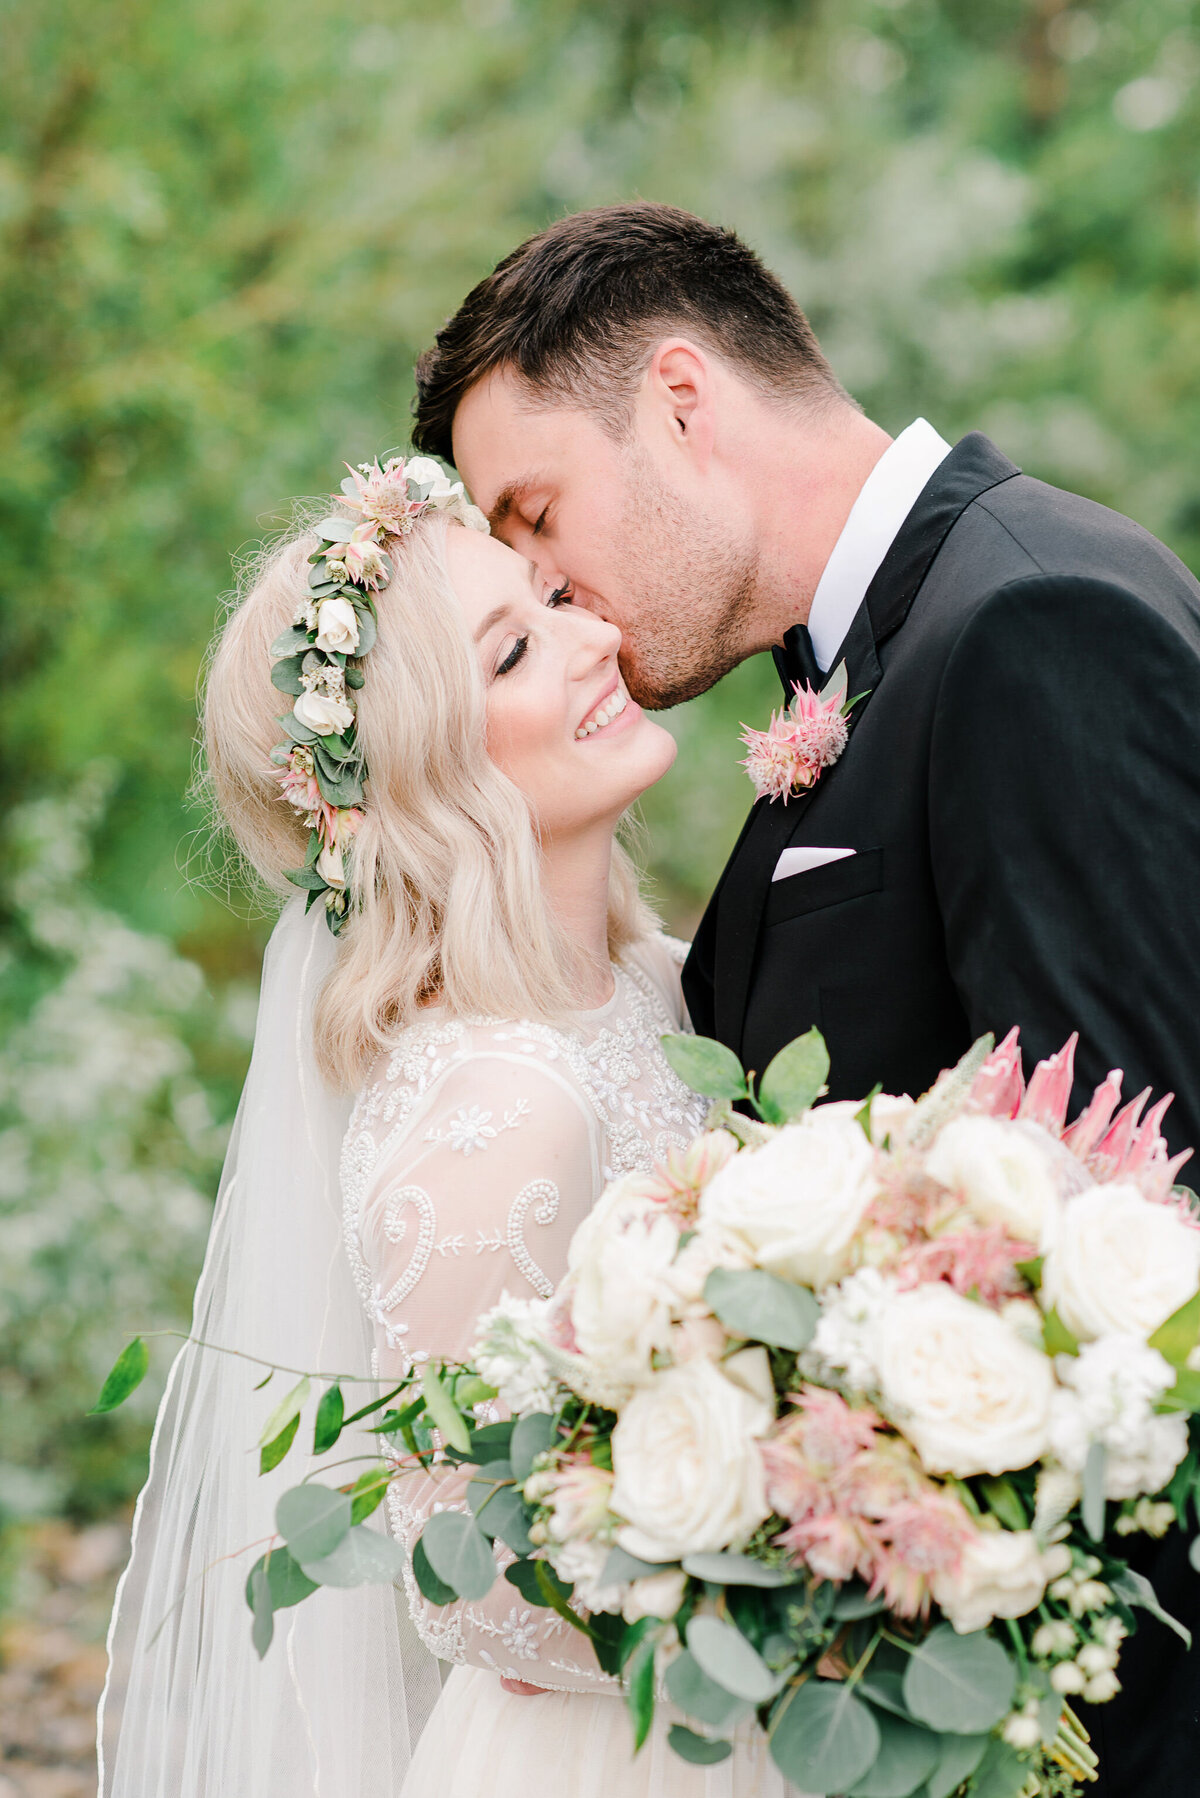 Gorgeous yet simple bridal hair and makeup by Bellamore Beauty, feminine Calgary hair and makeup artist, featured on the Brontë Bride Vendor Guide.